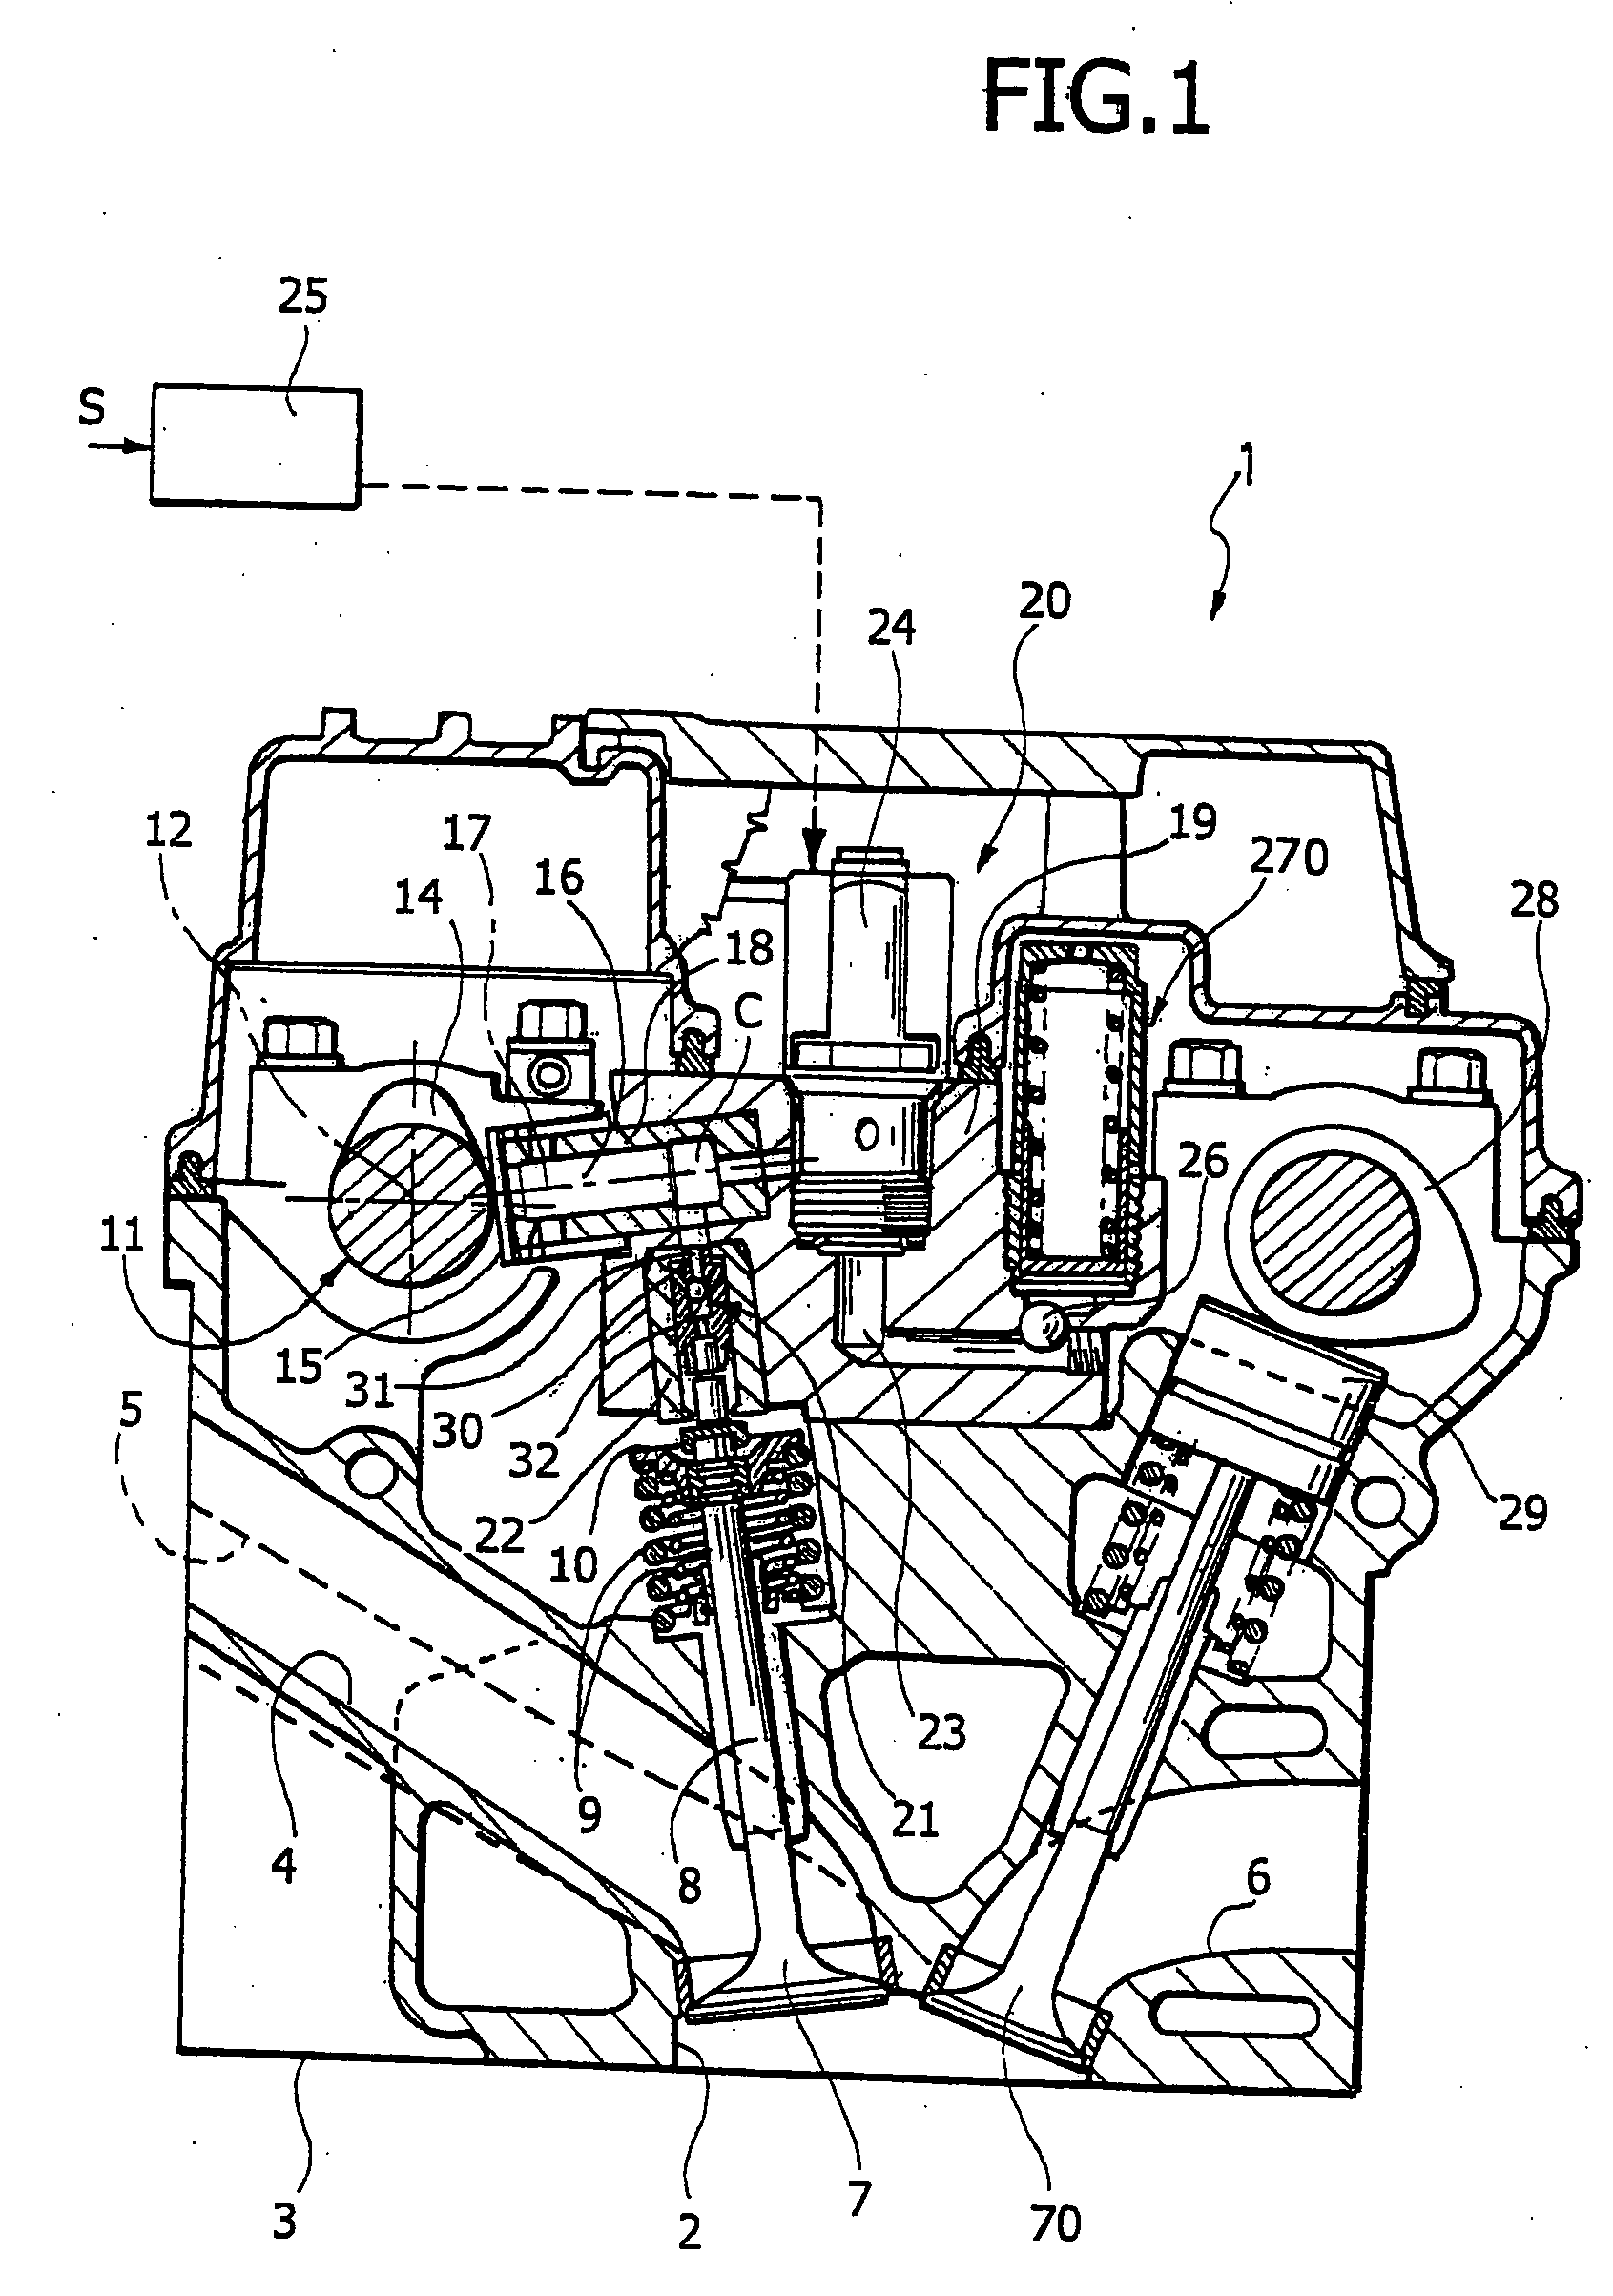 Internal combustion engine with valves with variable actuation which are driven by a single pumping piston and controlled by a single solenoid valve for each engine cylinder